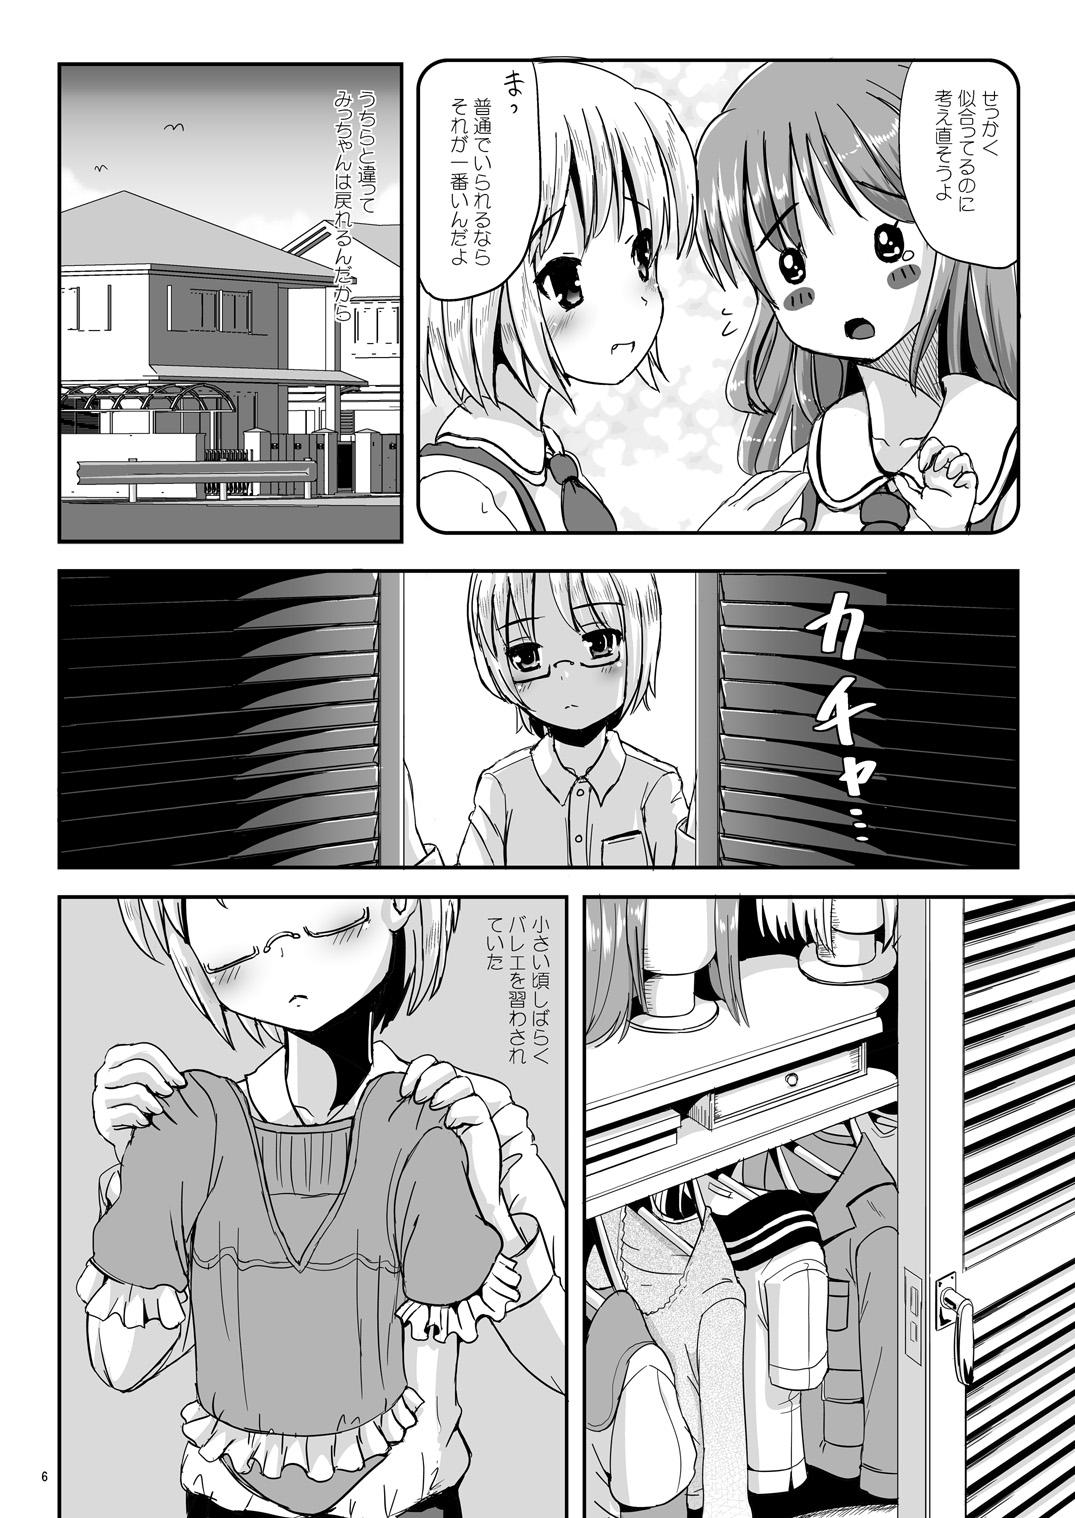 Cam Natsume no Shiori 6 Point Of View - Page 5